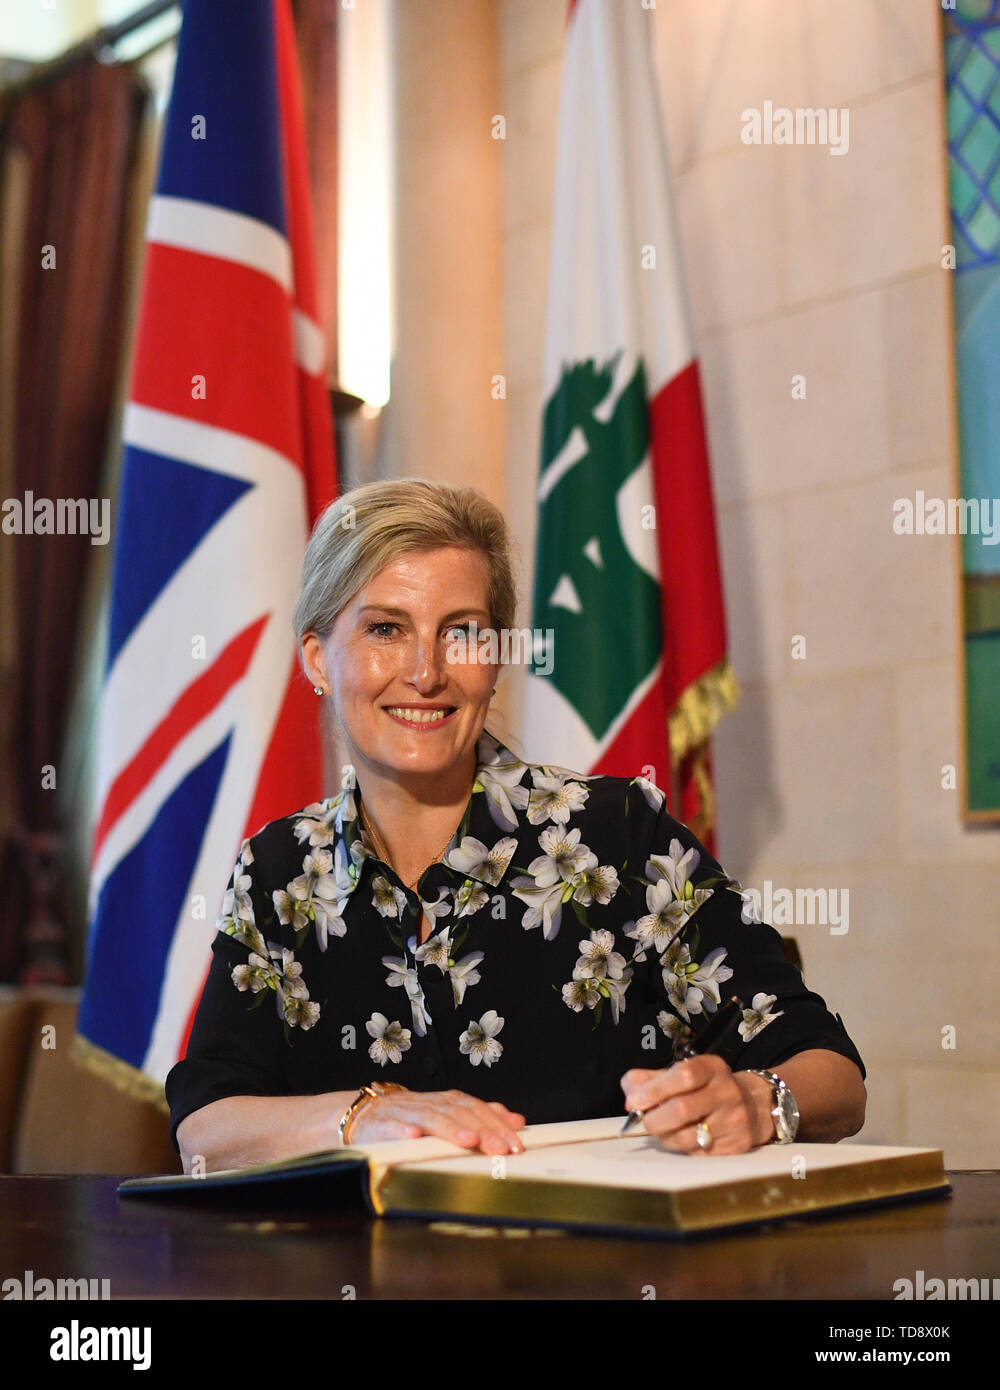 the-countess-of-wessex-signing-the-visitors-book-during-her-meeting-with-prime-minister-of-lebanon-saad-hariri-in-beirut-lebanon-as-part-of-the-first-official-royal-visit-to-the-country-TD8X0K.jpg